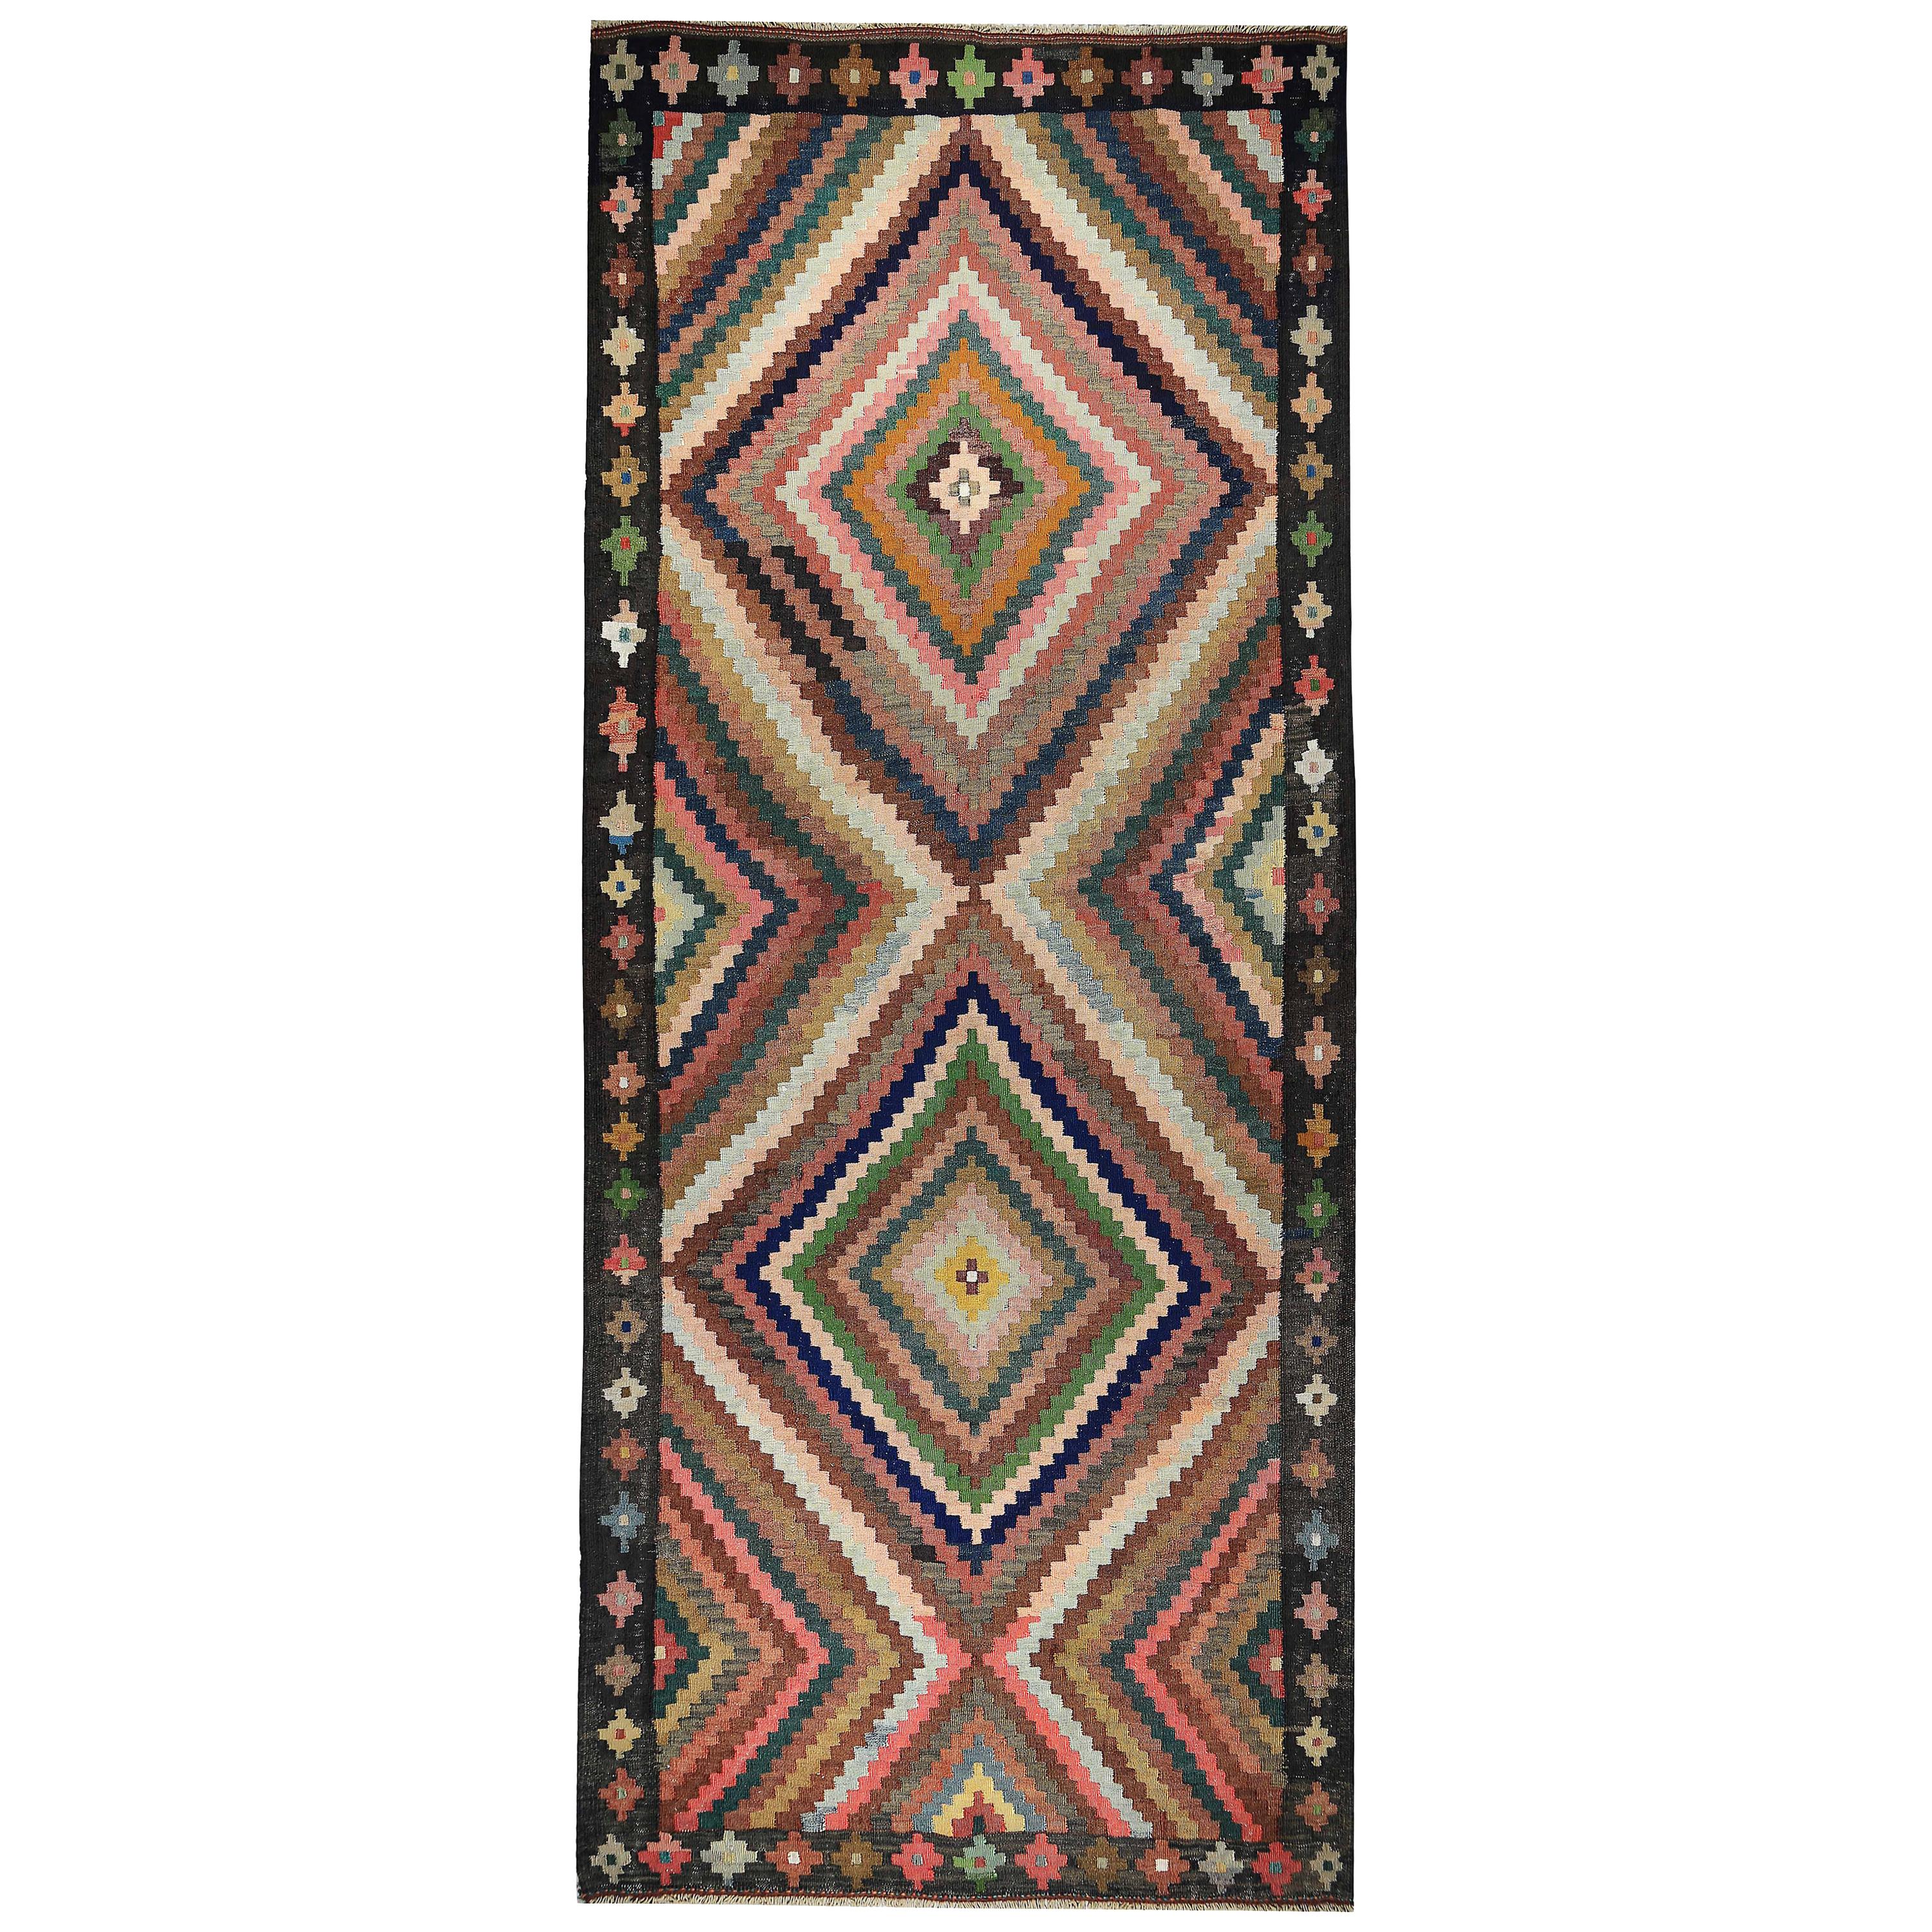 Turkish Kilim Runner Rug with Colorful Tribal Medallions and Patterns